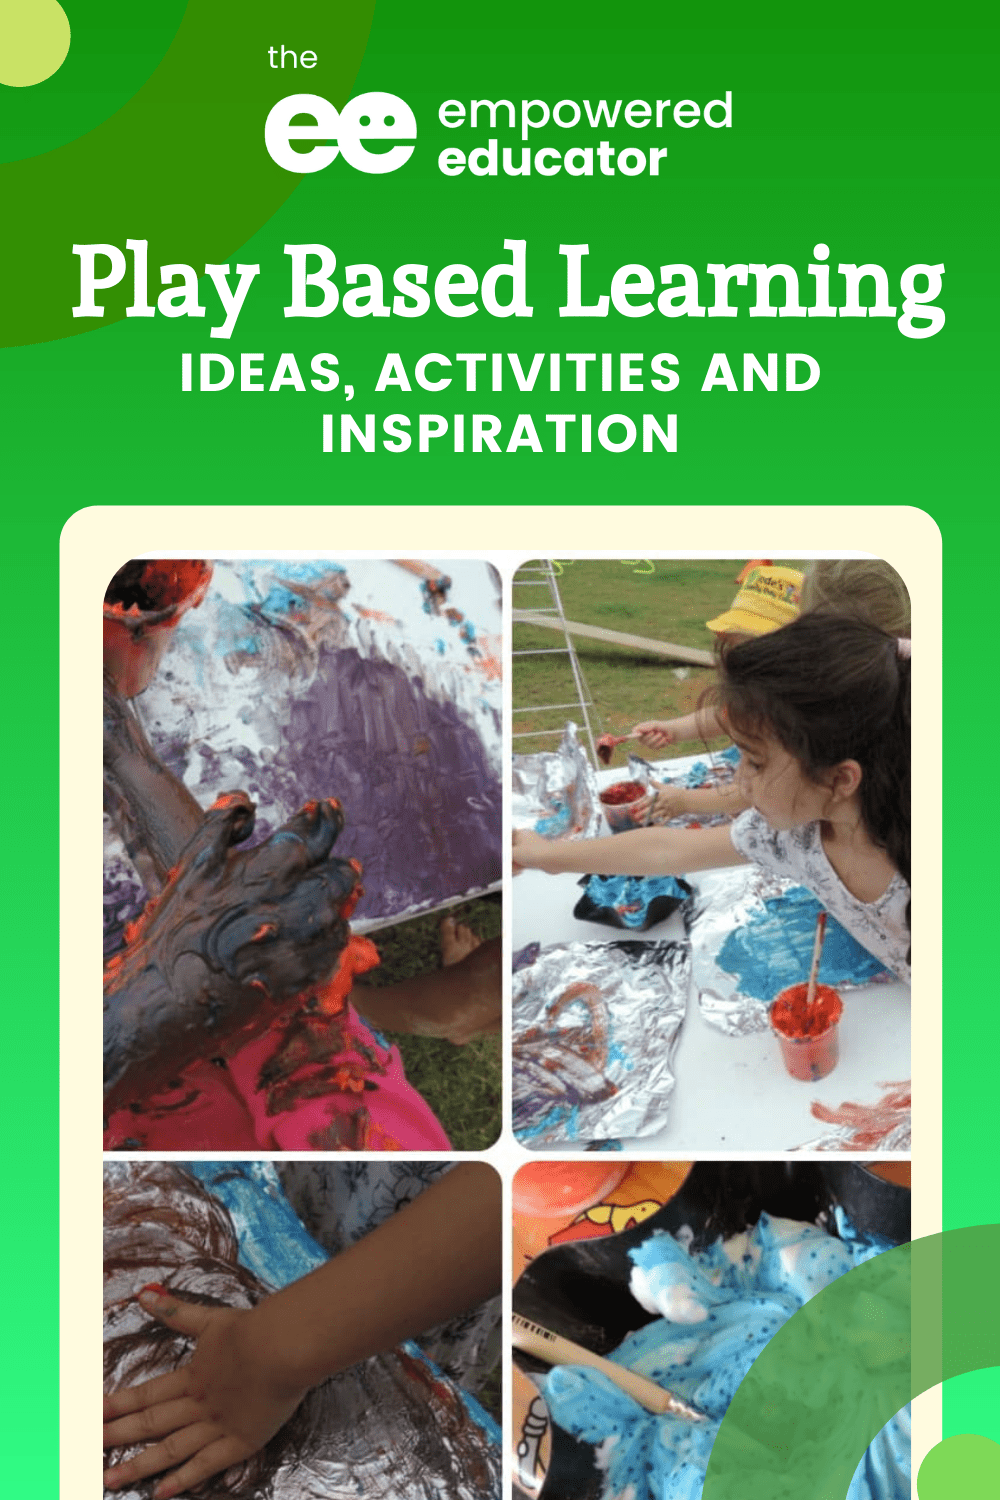 Skill Building: Gluing Activities for Preschoolers - The Empowered